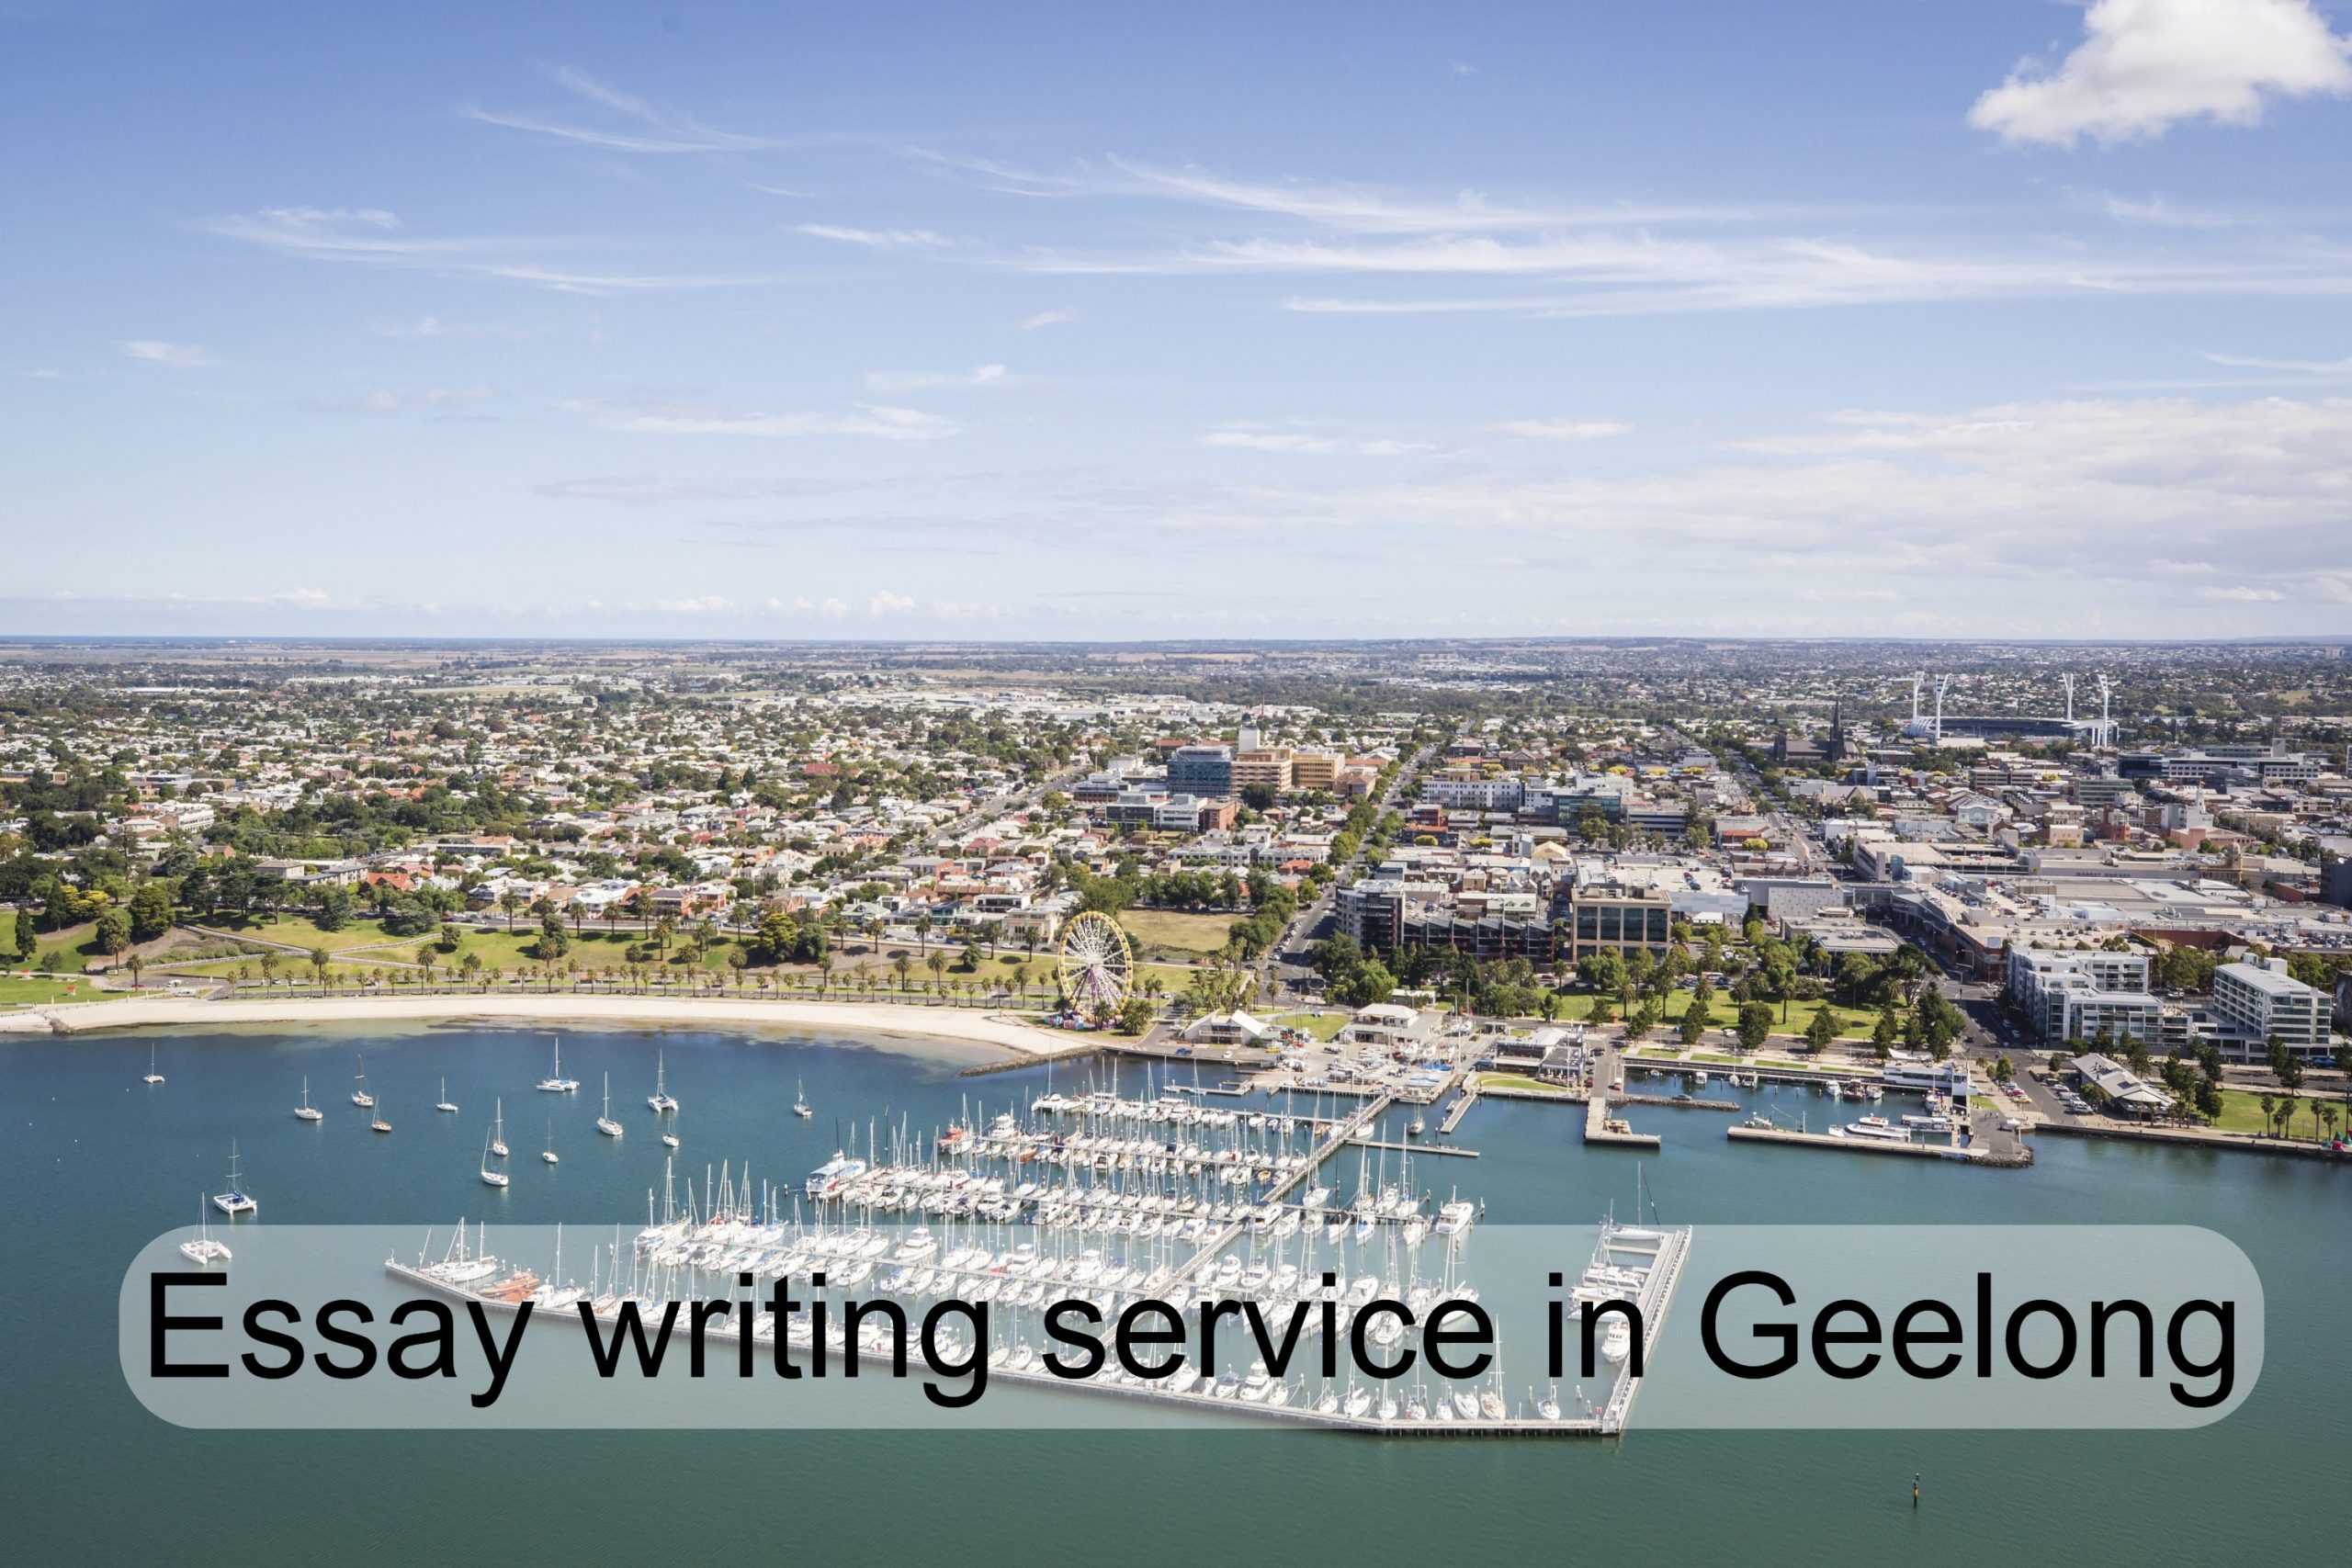 Essay writing service in Geelong